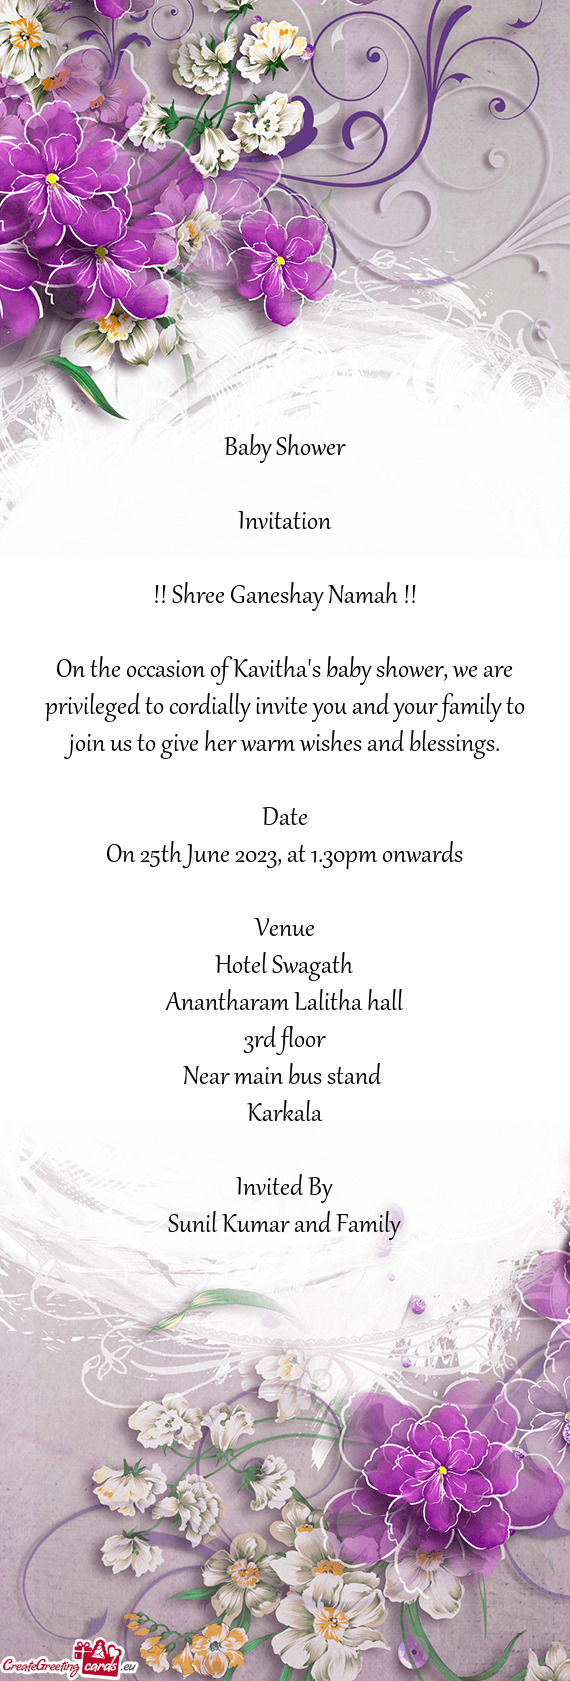 On the occasion of Kavitha's baby shower, we are privileged to cordially invite you and your family